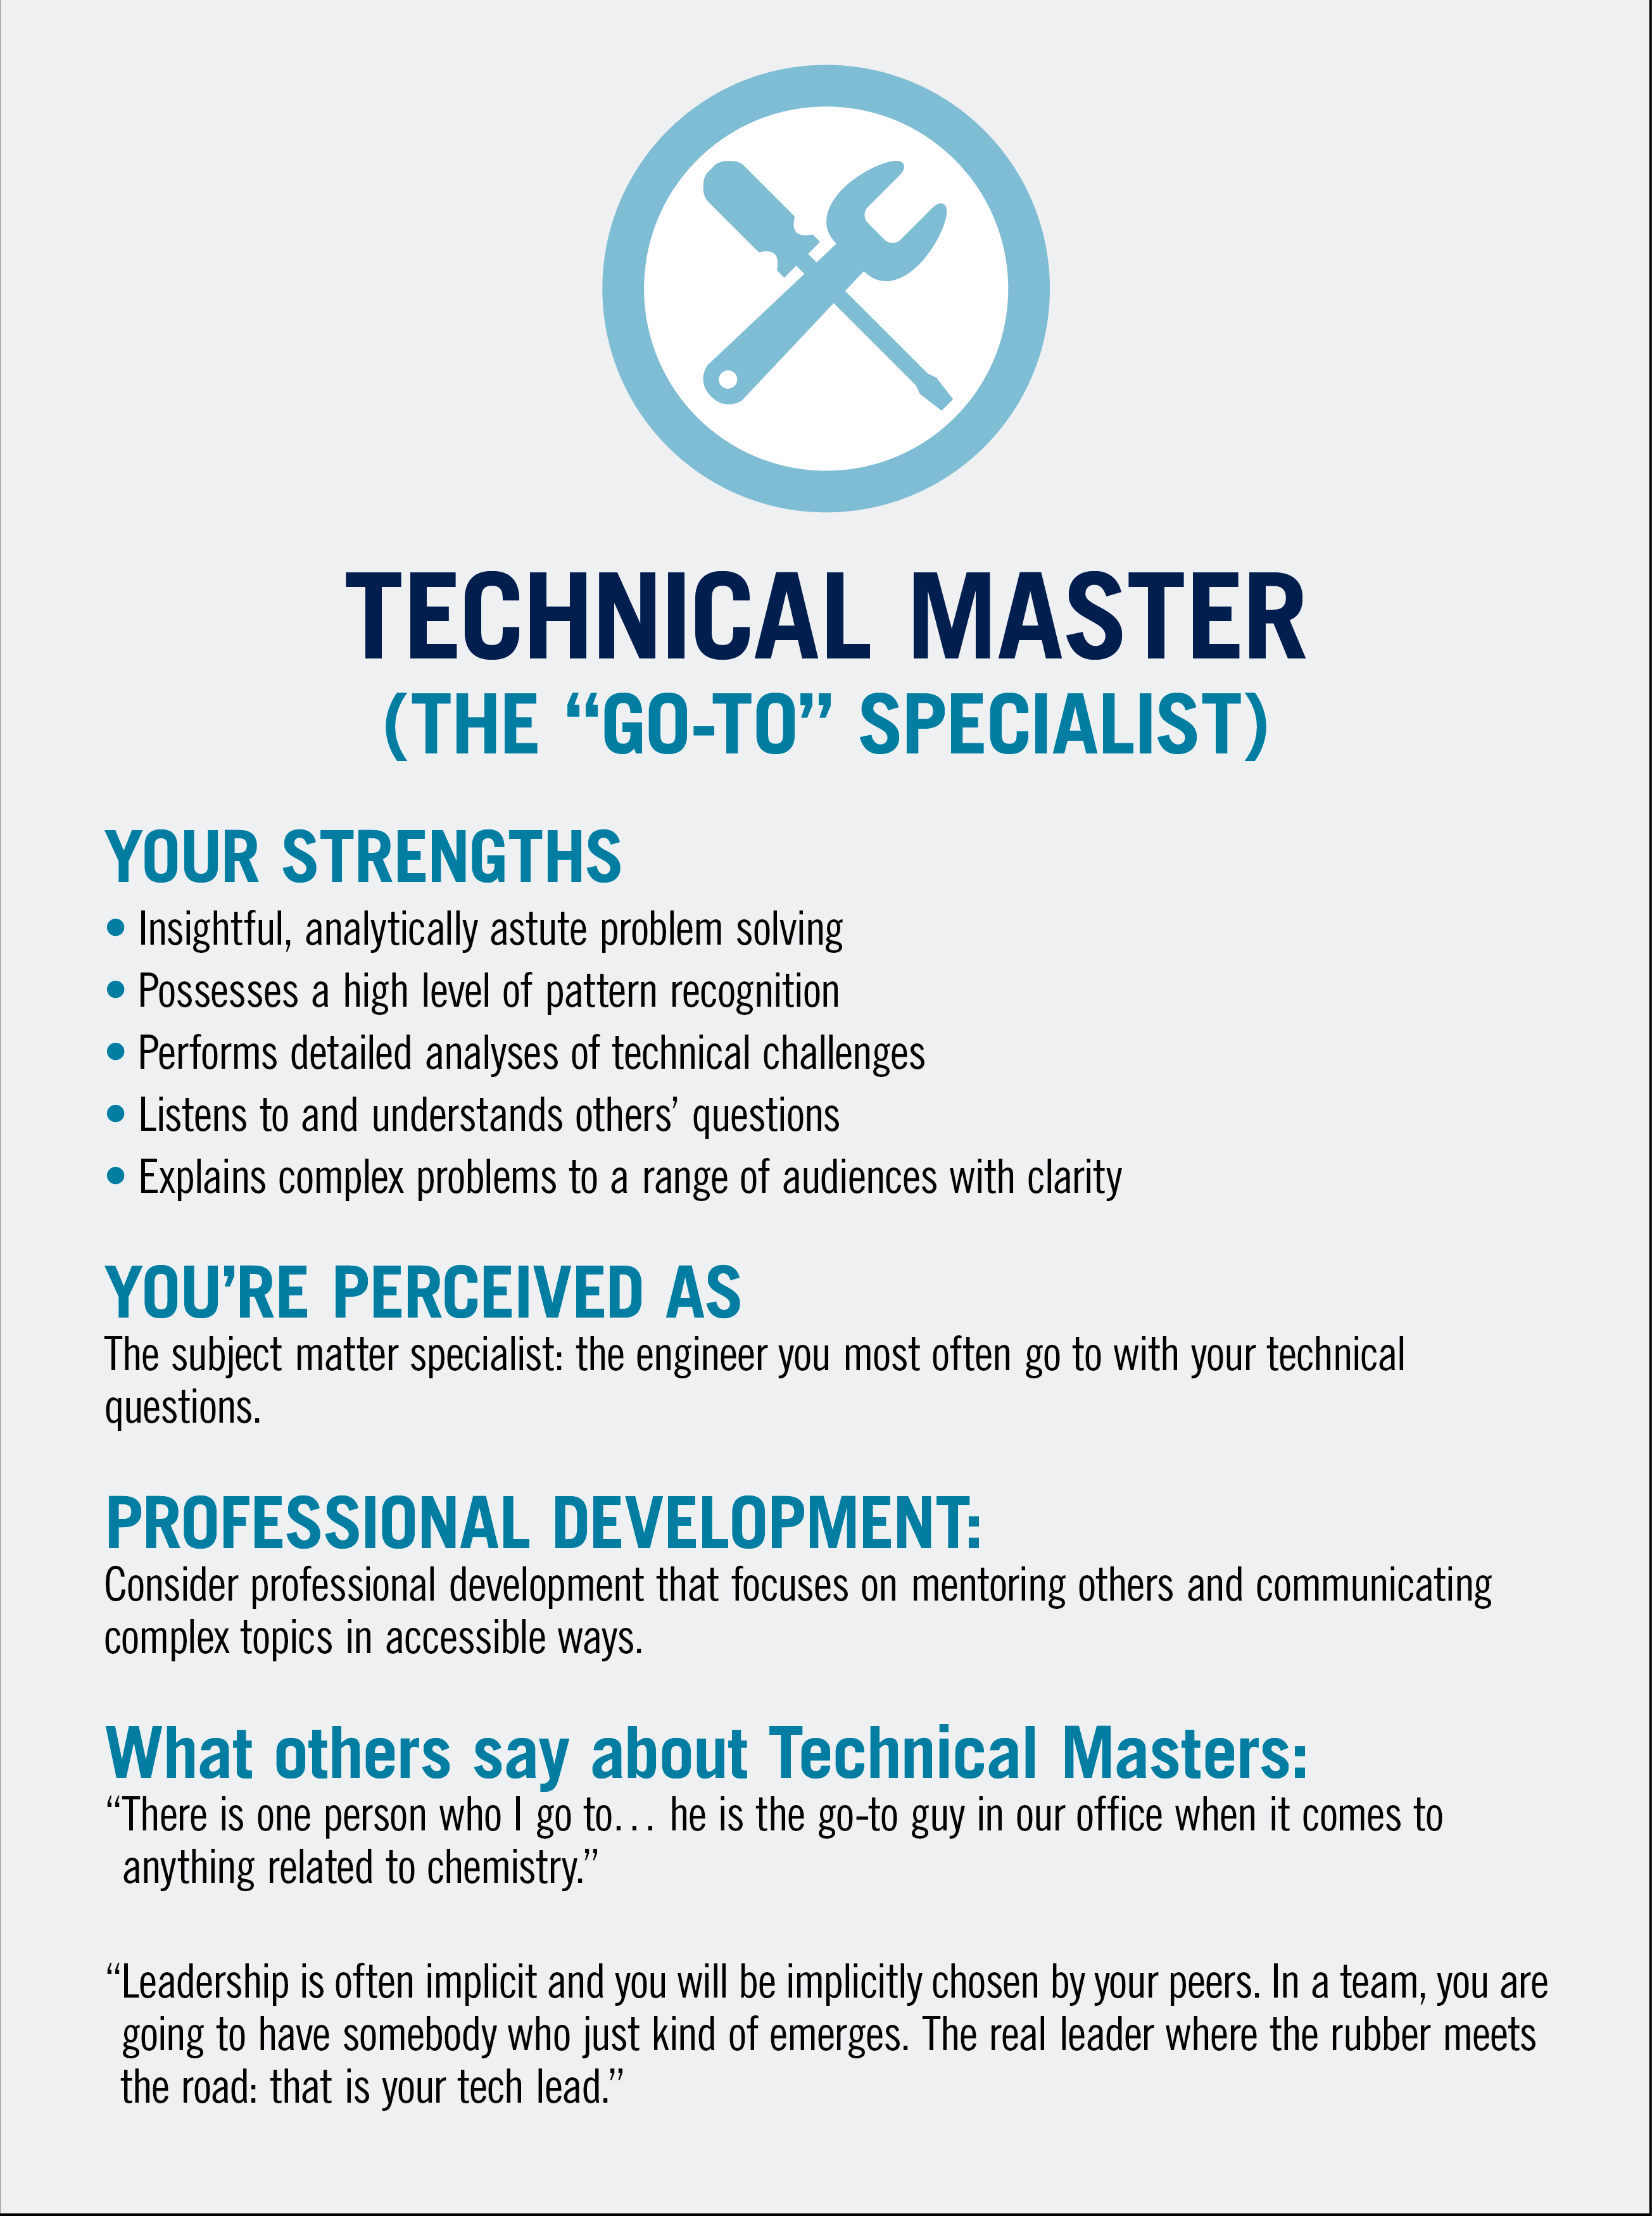 Technical Master Characteristics Poster